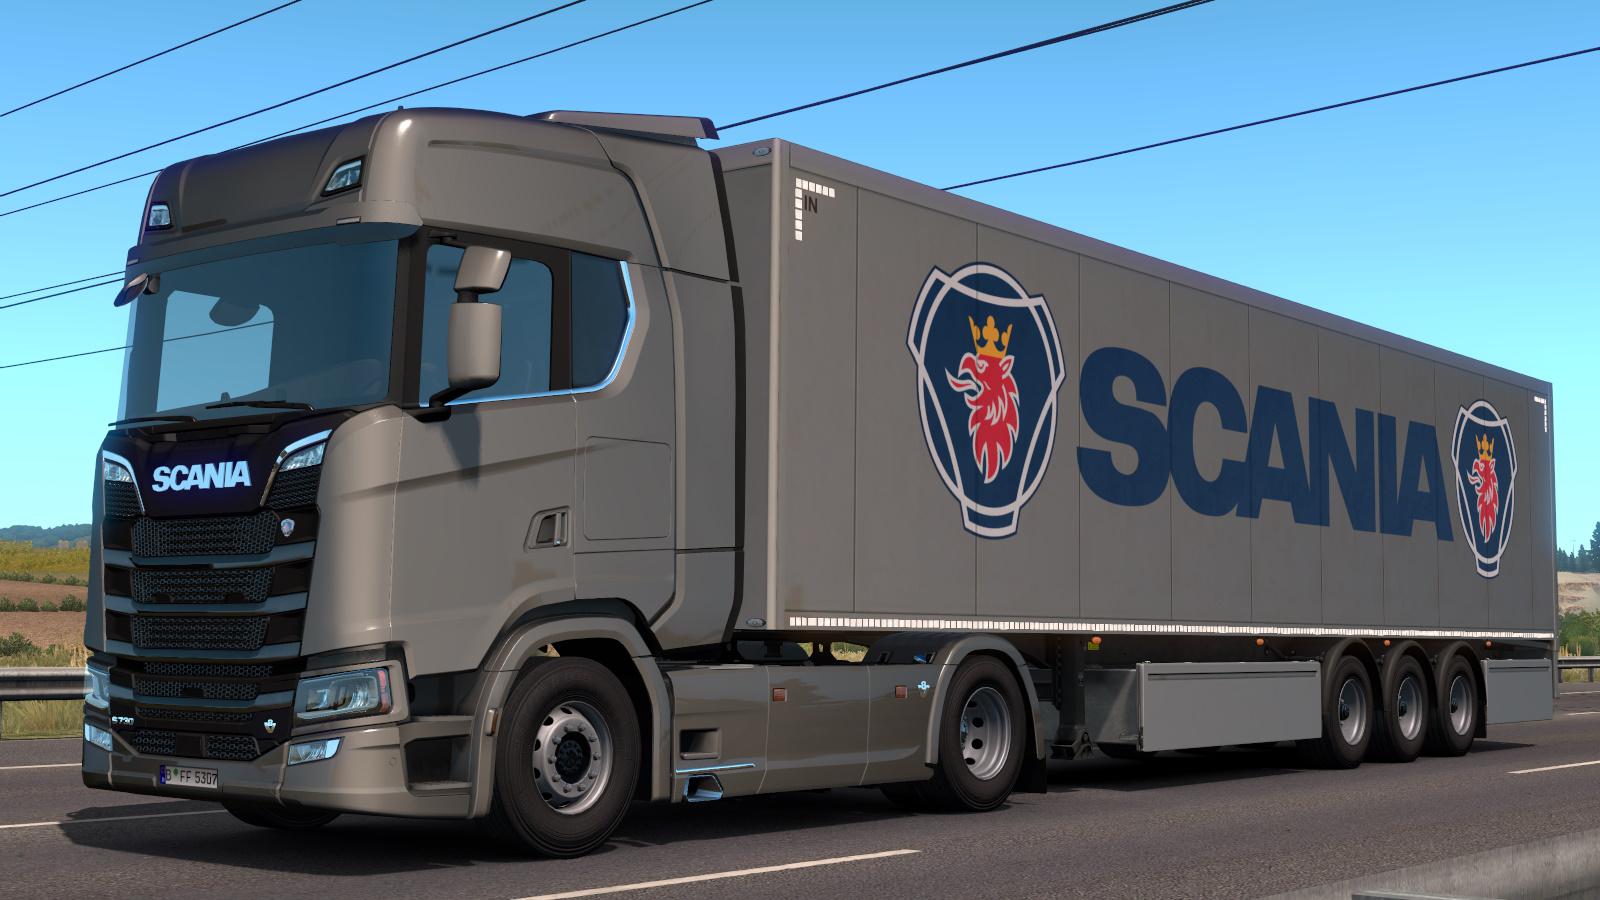 ETS2 - Trucks Brands Skins For All Owned Trailers V1.0 (1.36.x) | Euro